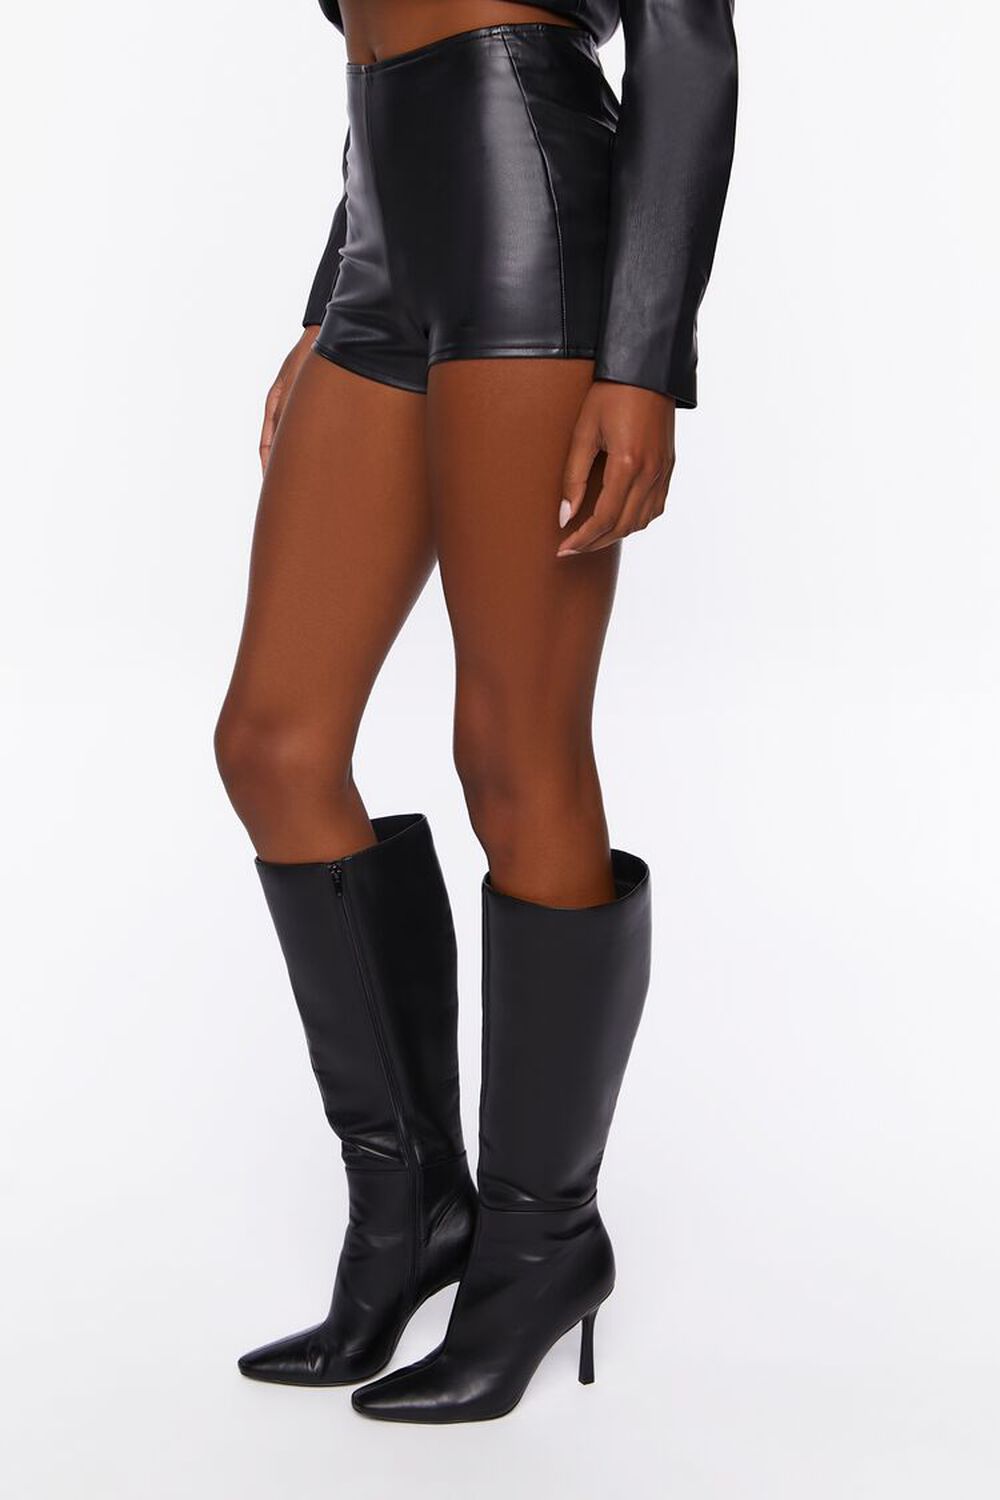 Faux Leather Hot Shorts